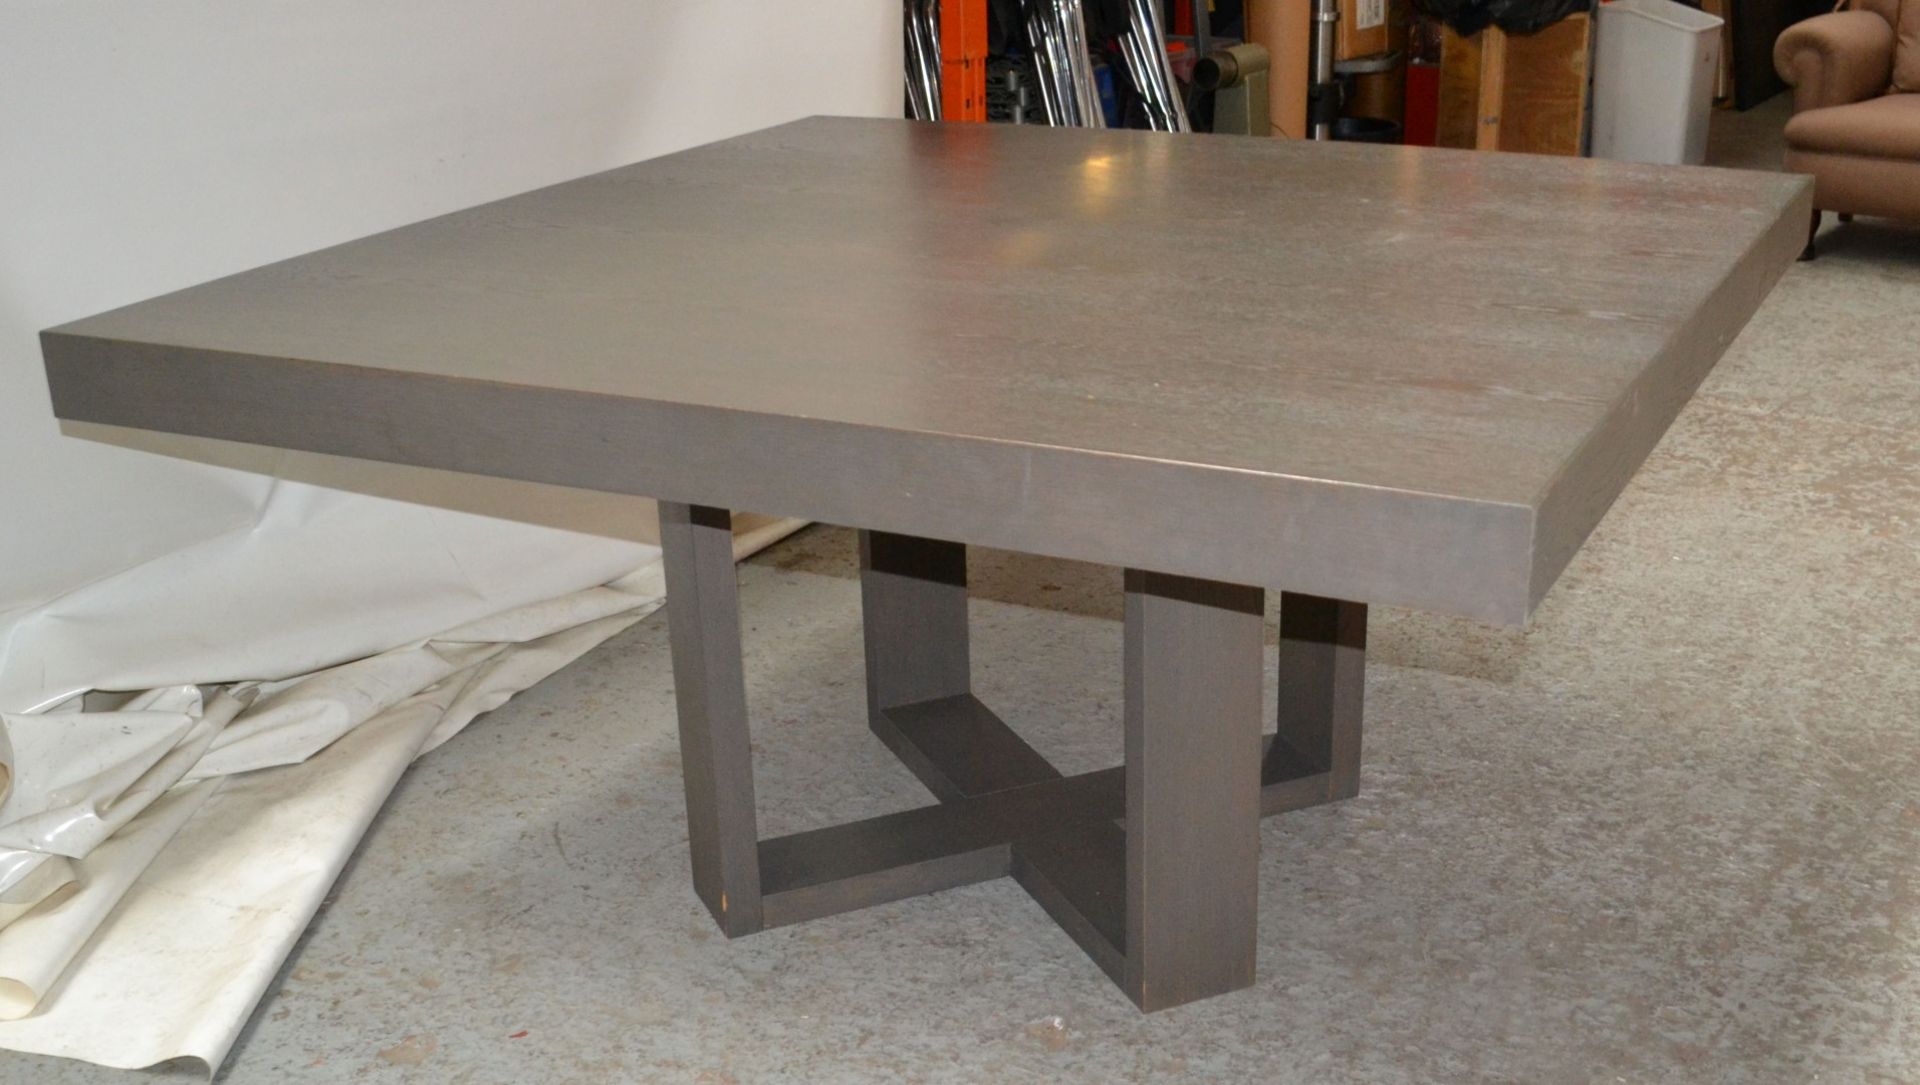 1 x Large Square Wooden Dining Table in a Grey Oak Coloured Finish - CL314 - Location: Altrincham - Image 3 of 10